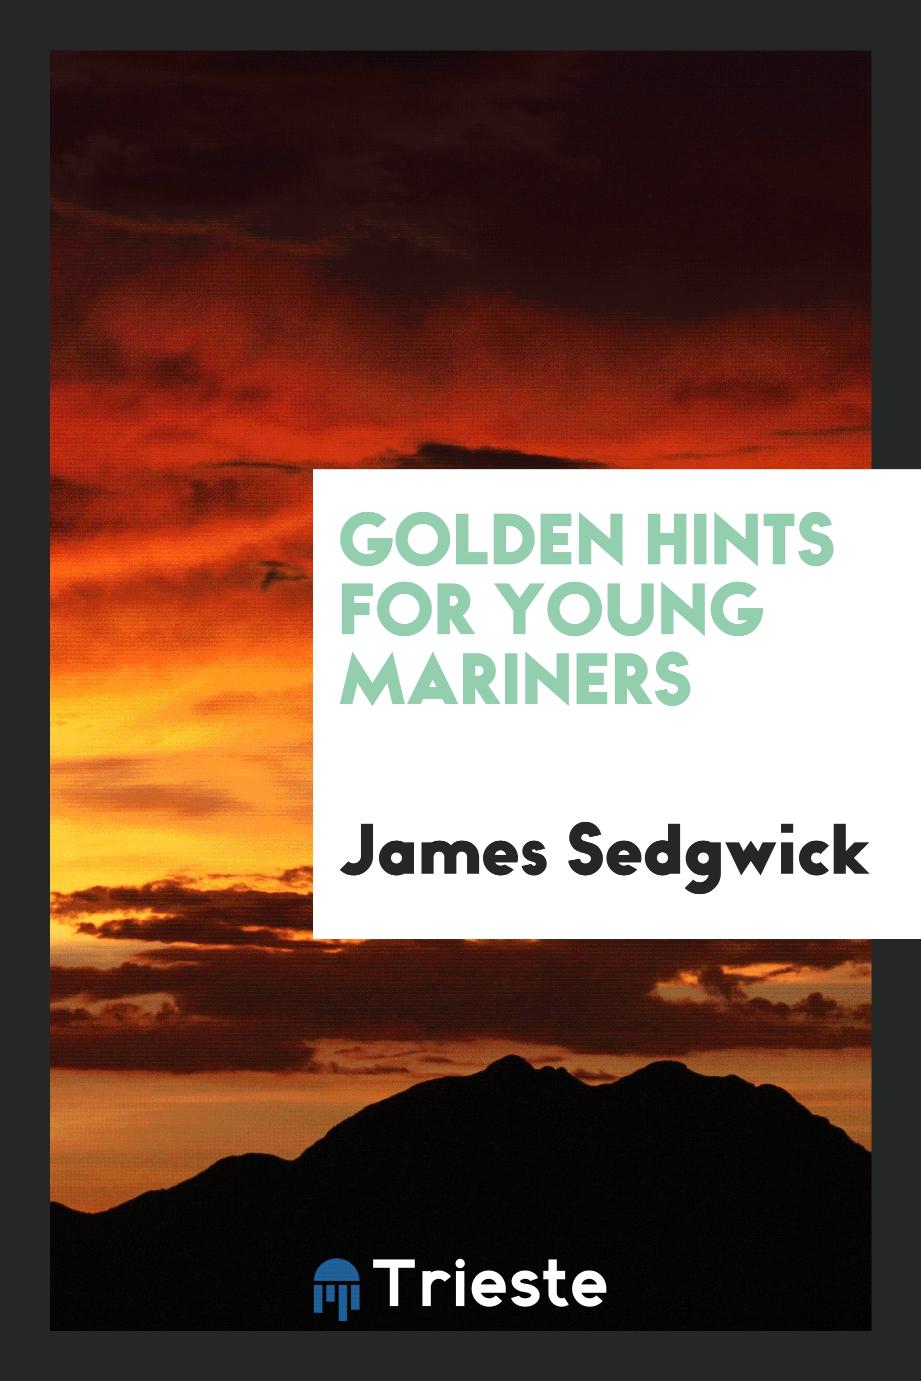 Golden hints for young mariners